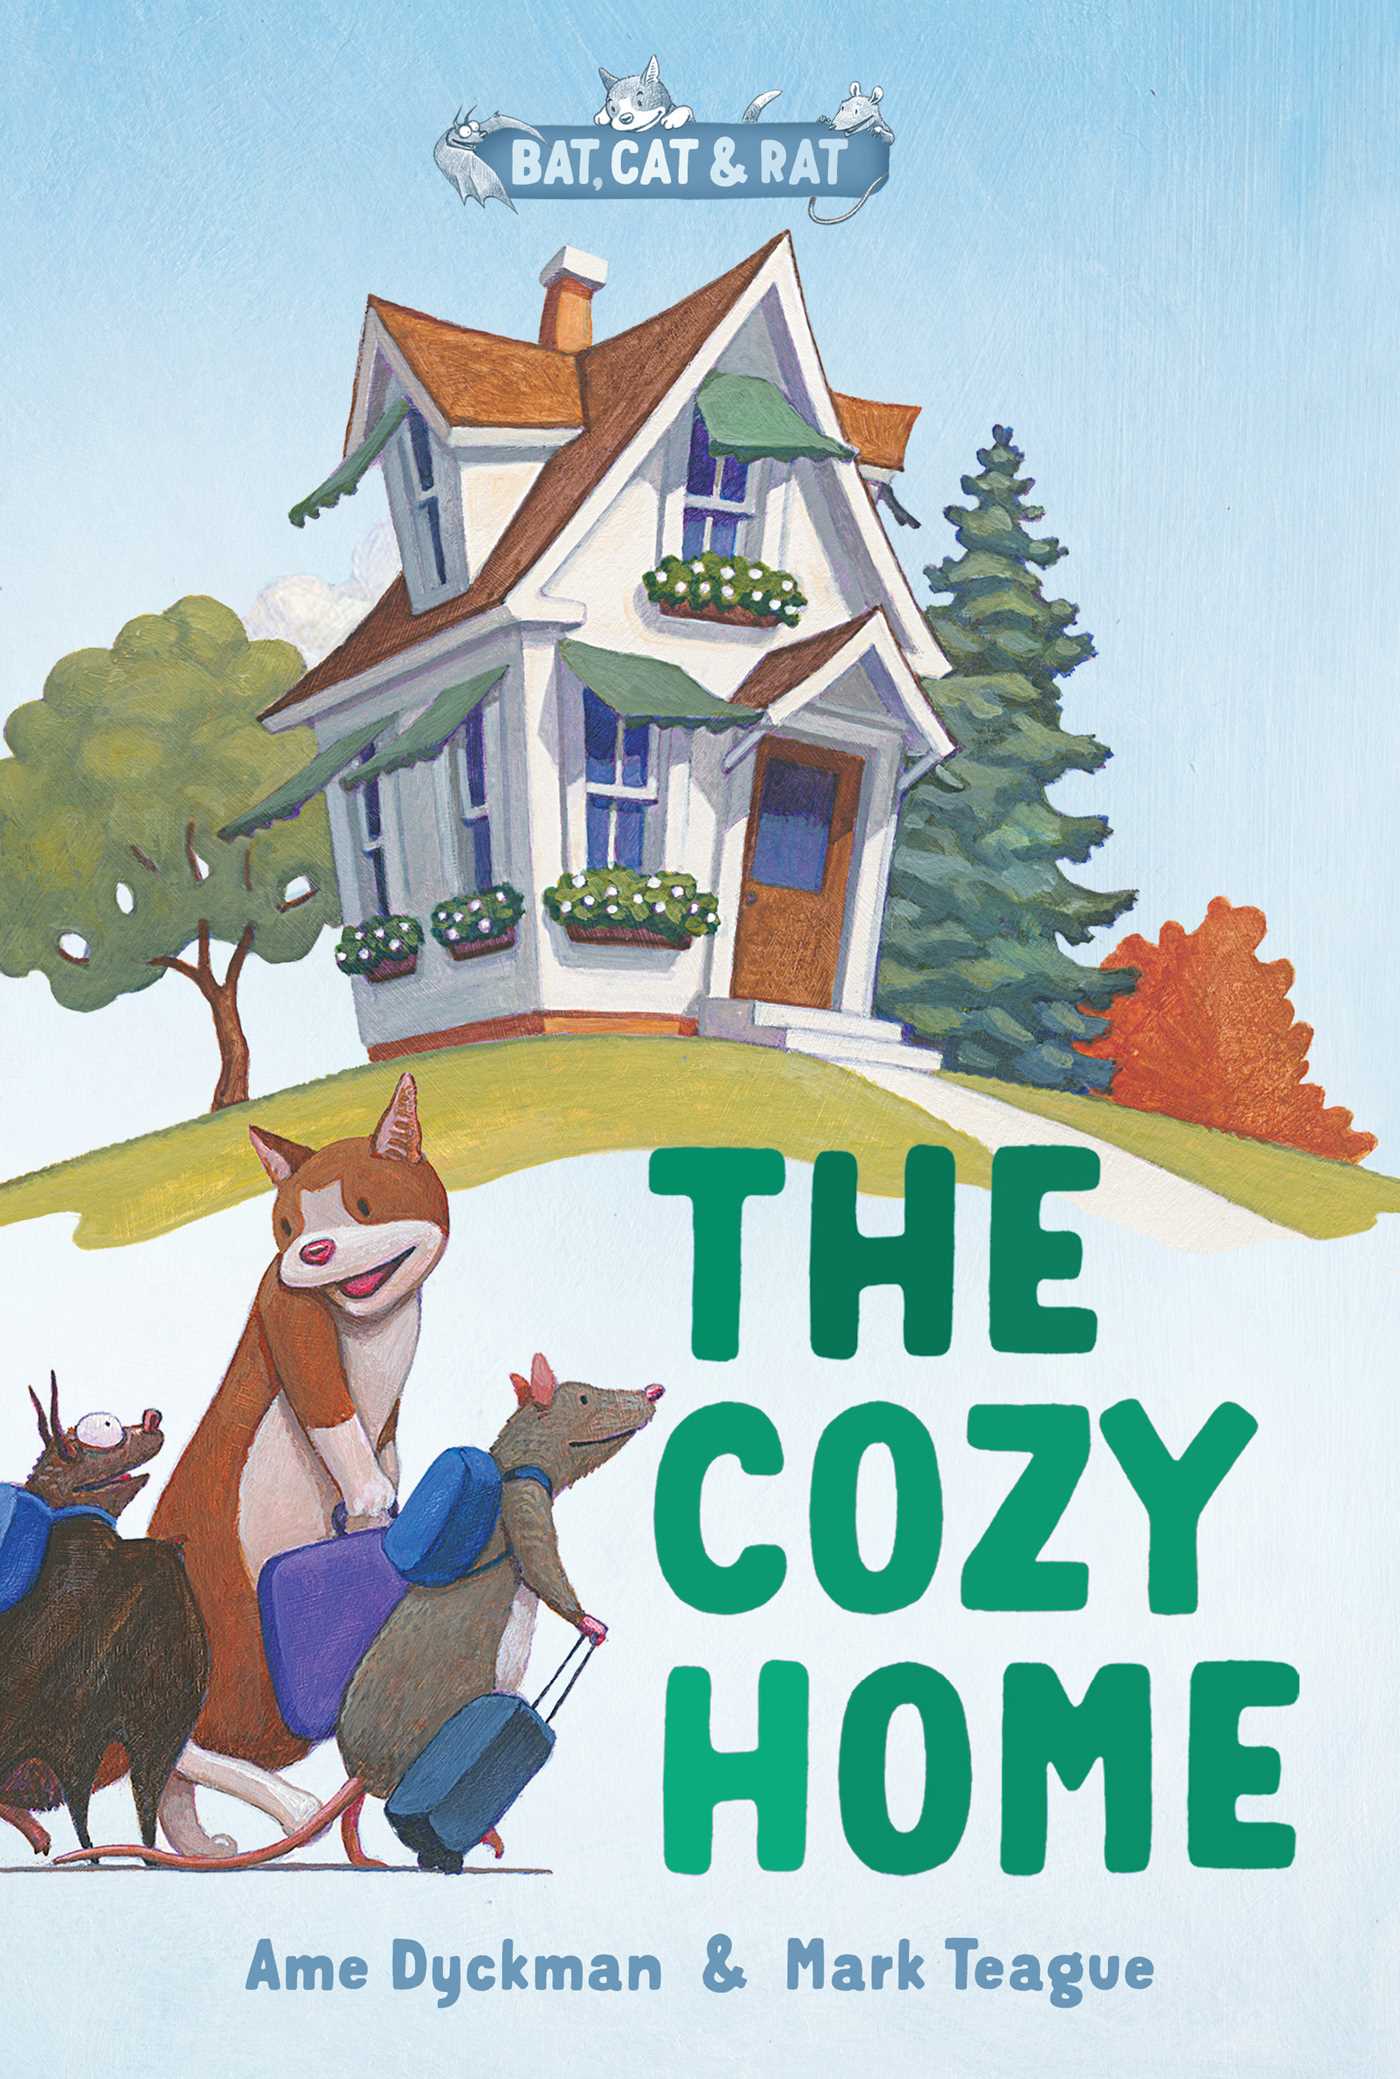 Image for "The Cozy Home"